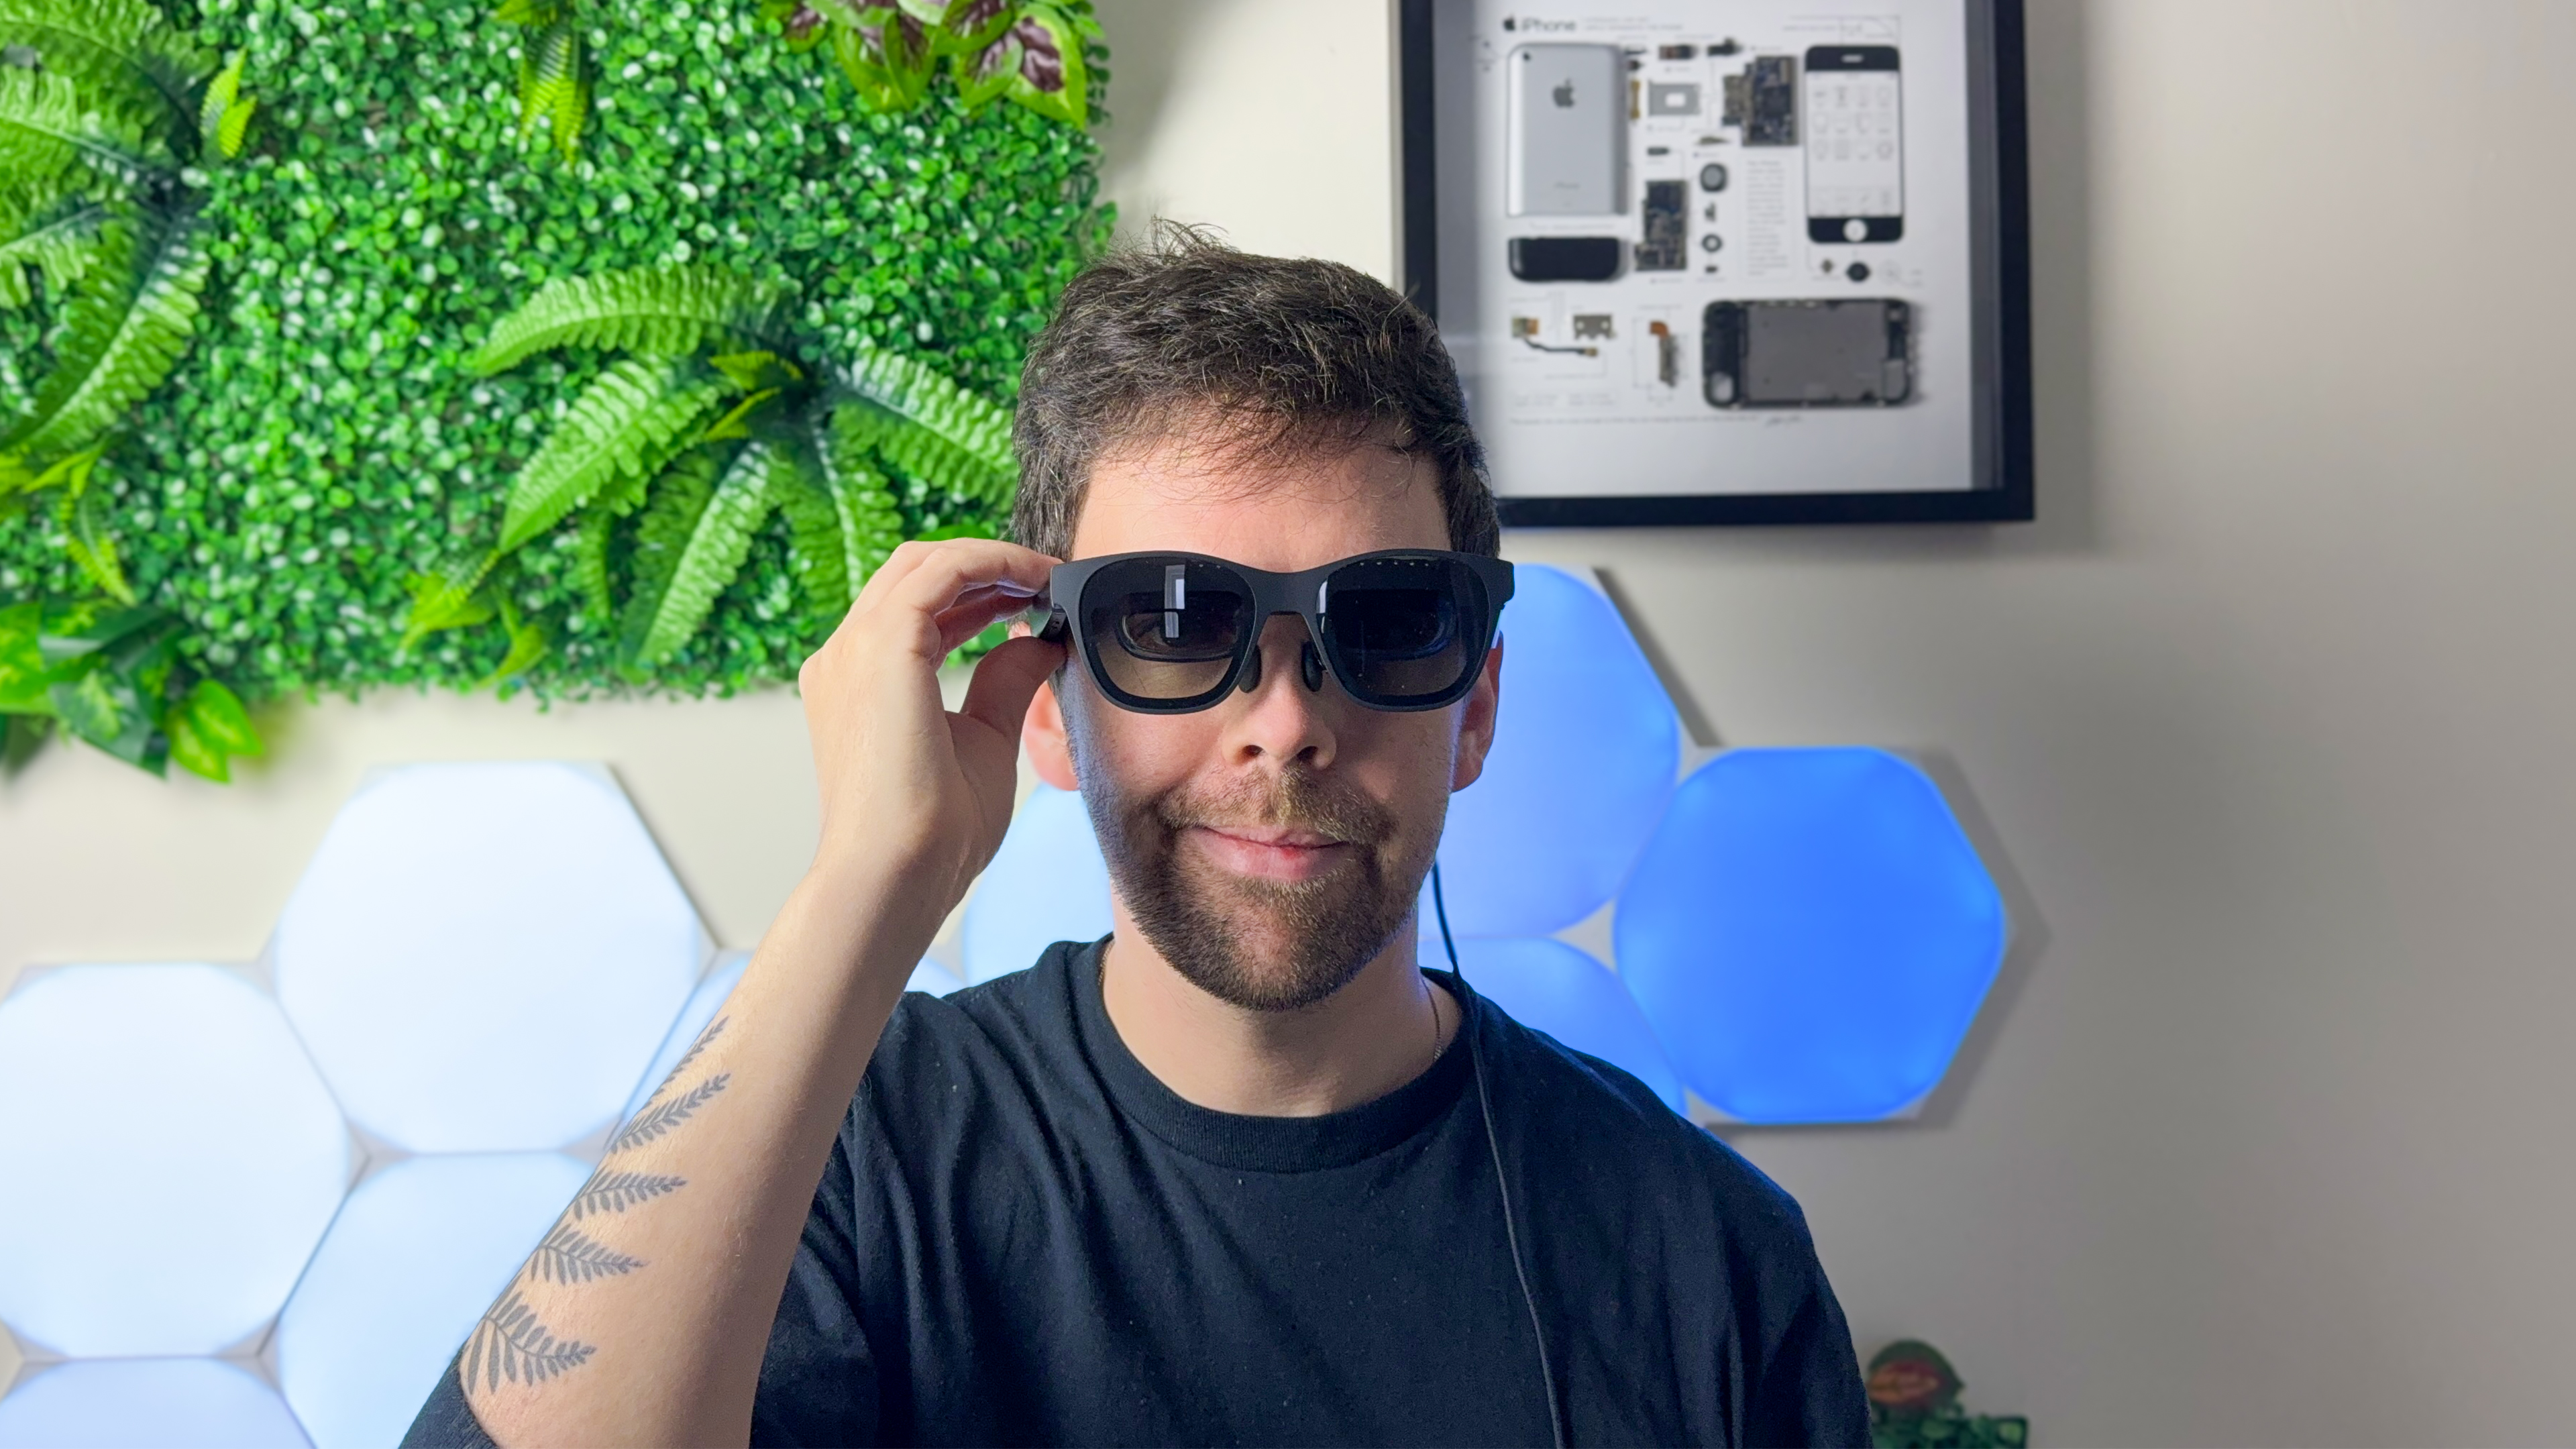 XREAL Air 2 AR glasses review — An augmented reality check